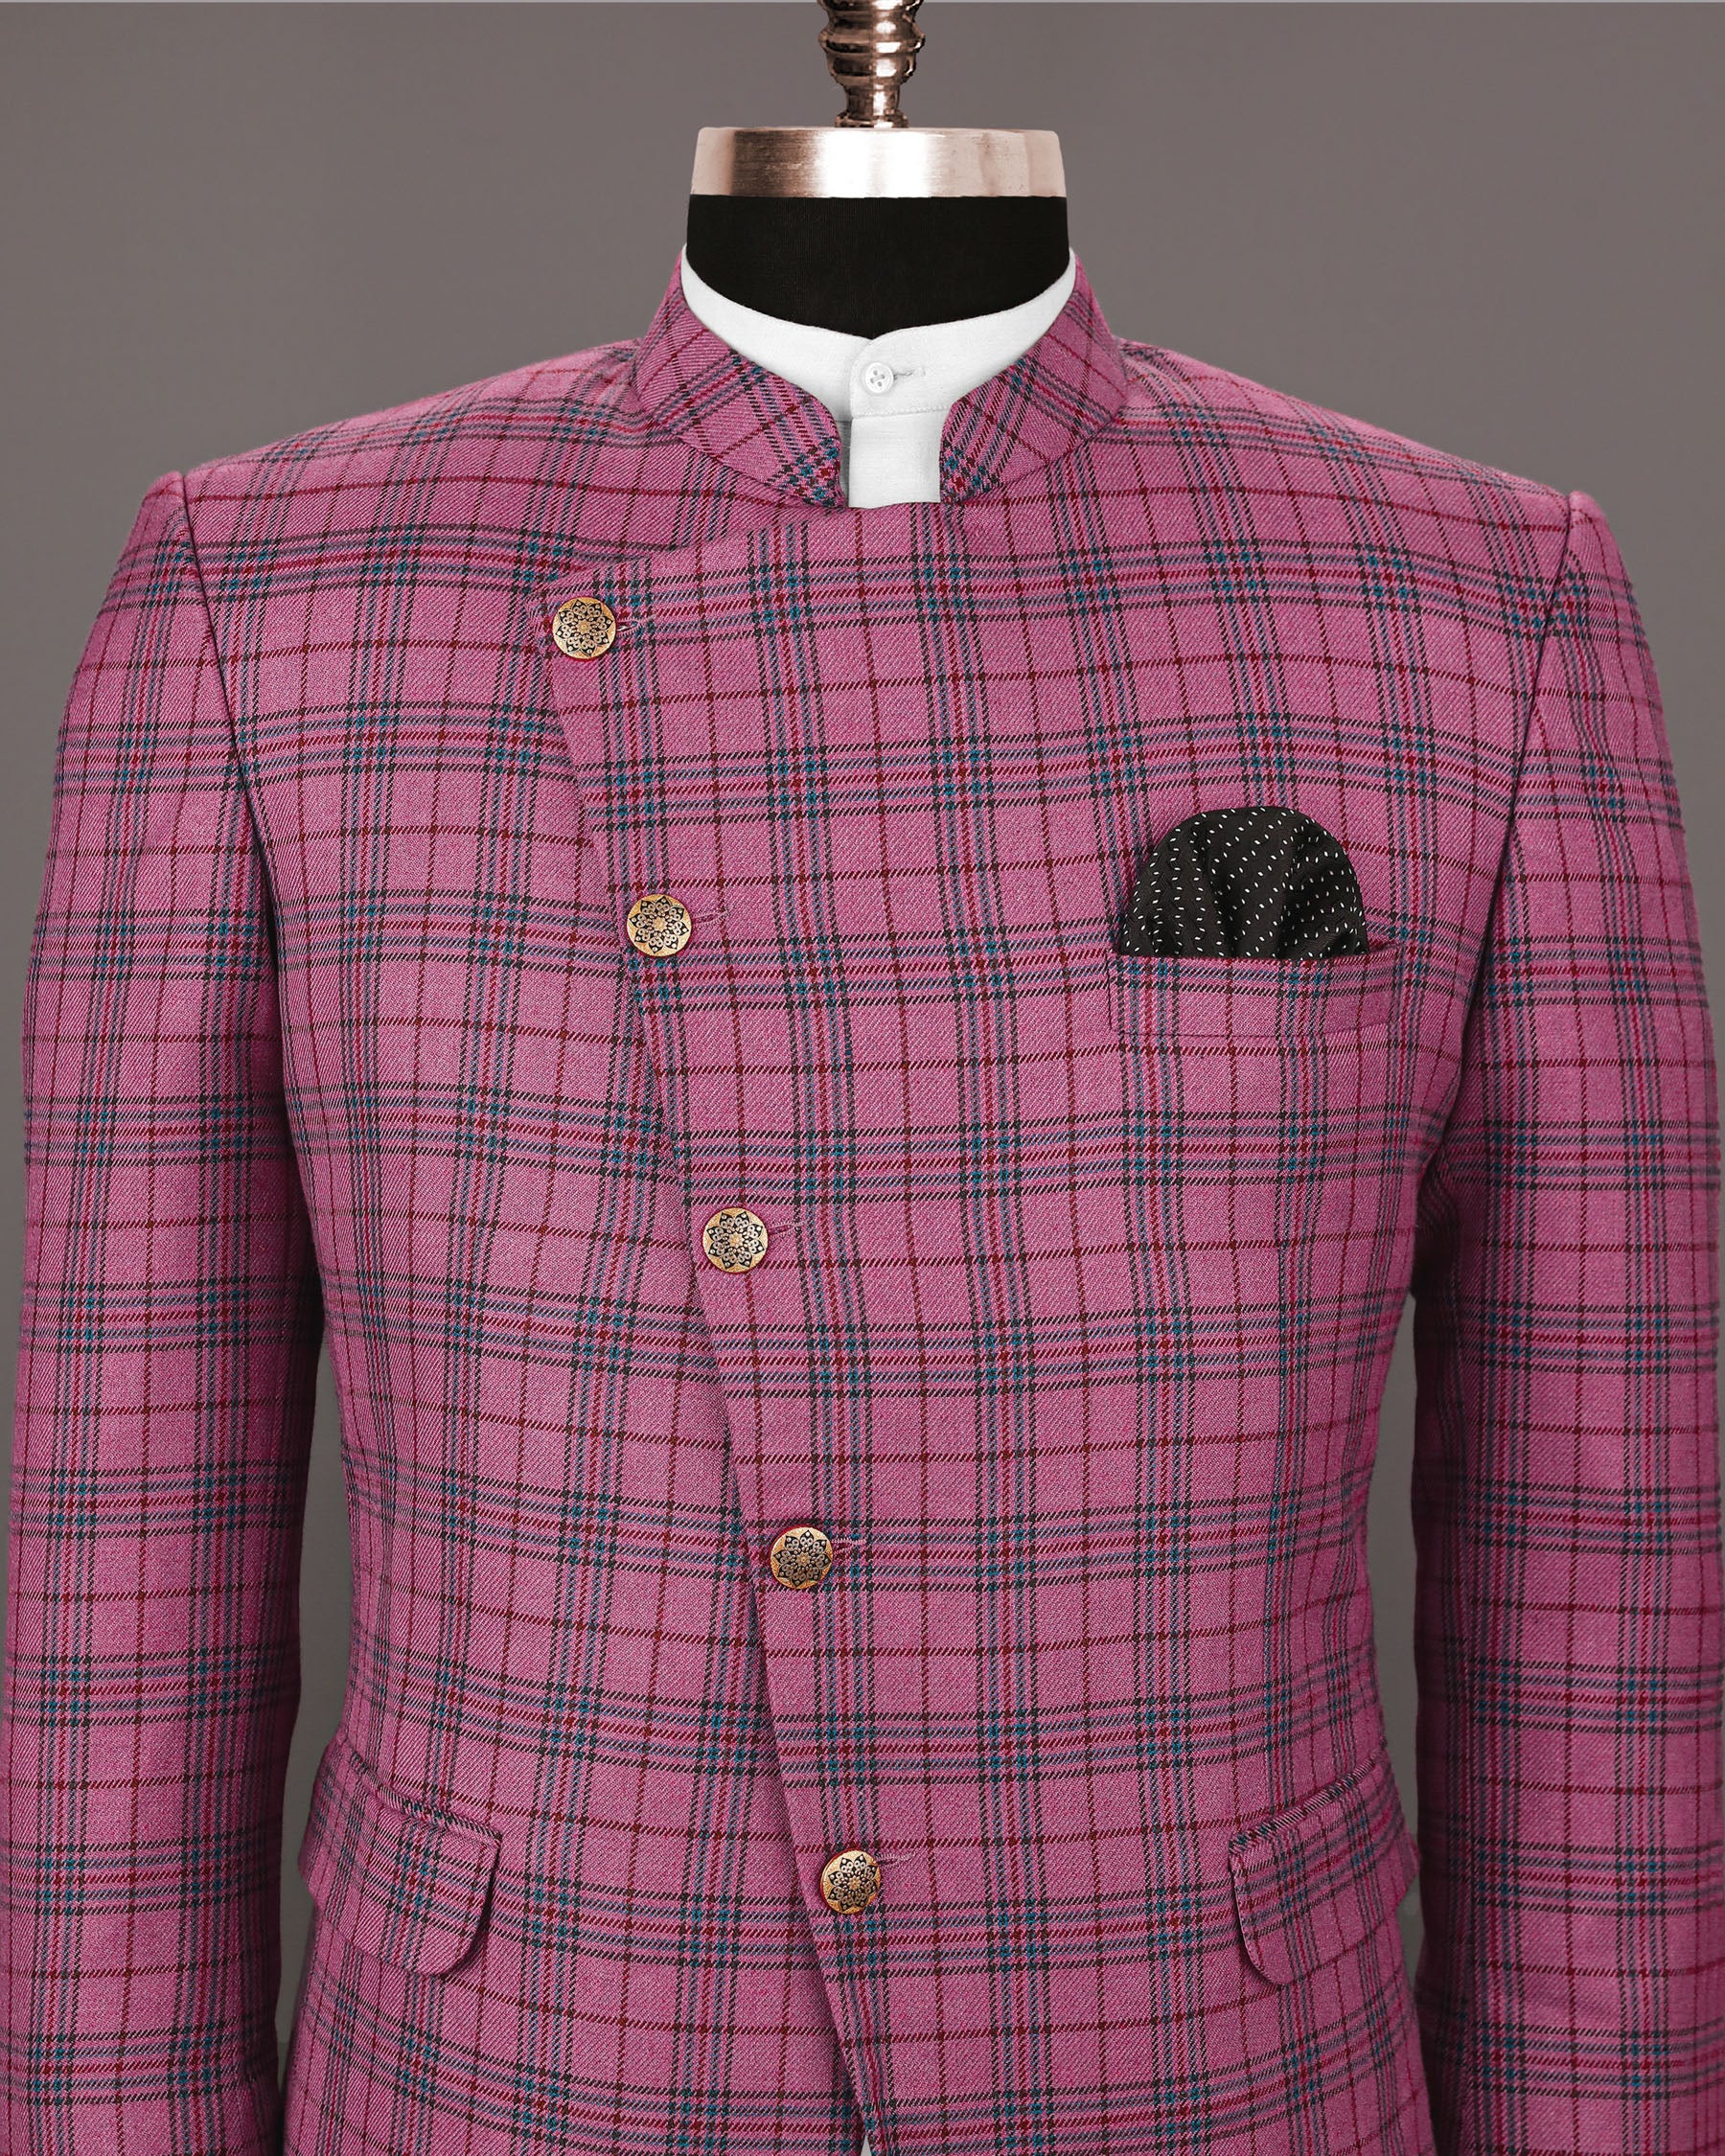 Tapestry Pink Checked Cross Buttoned Wool Rich Blazer BL1196-CBG-36, BL1196-CBG-38, BL1196-CBG-44, BL1196-CBG-56, BL1196-CBG-48, BL1196-CBG-54, BL1196-CBG-60, BL1196-CBG-50, BL1196-CBG-40, BL1196-CBG-46, BL1196-CBG-52, BL1196-CBG-58, BL1196-CBG-42